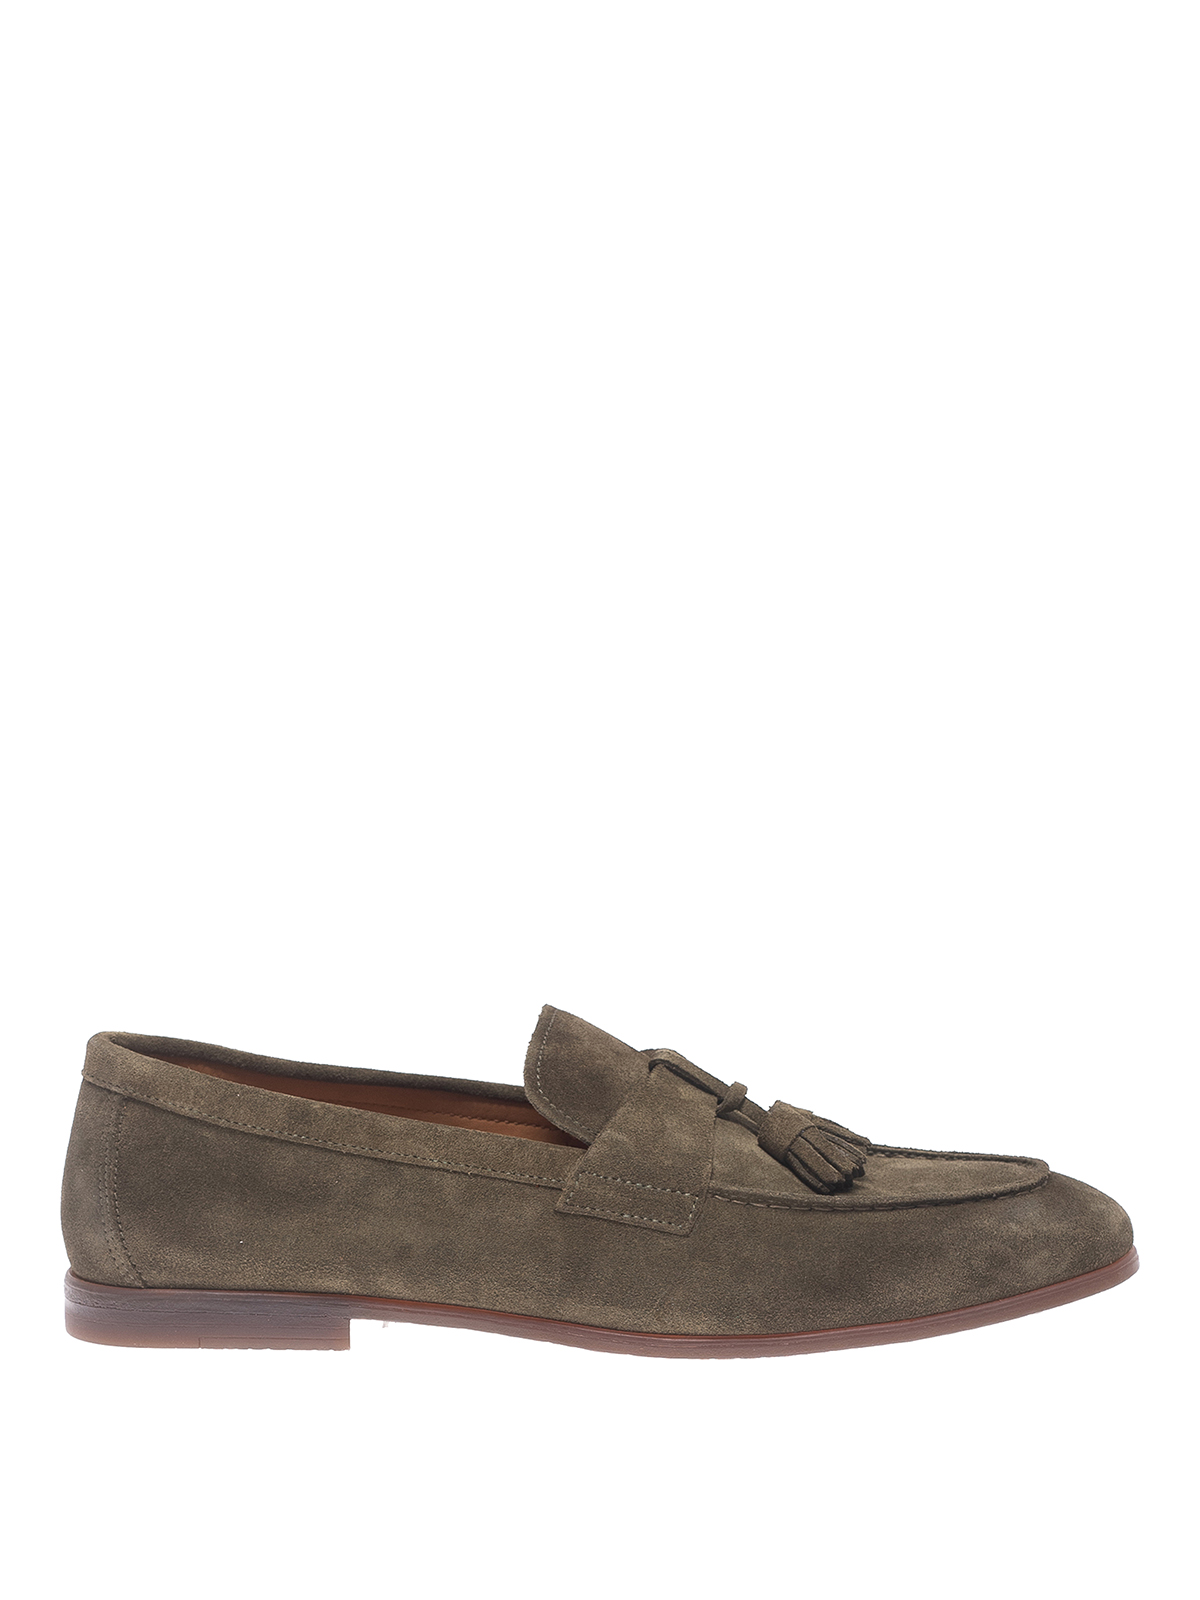 DOUCAL'S SUEDE LOAFERS WITH TASSELS